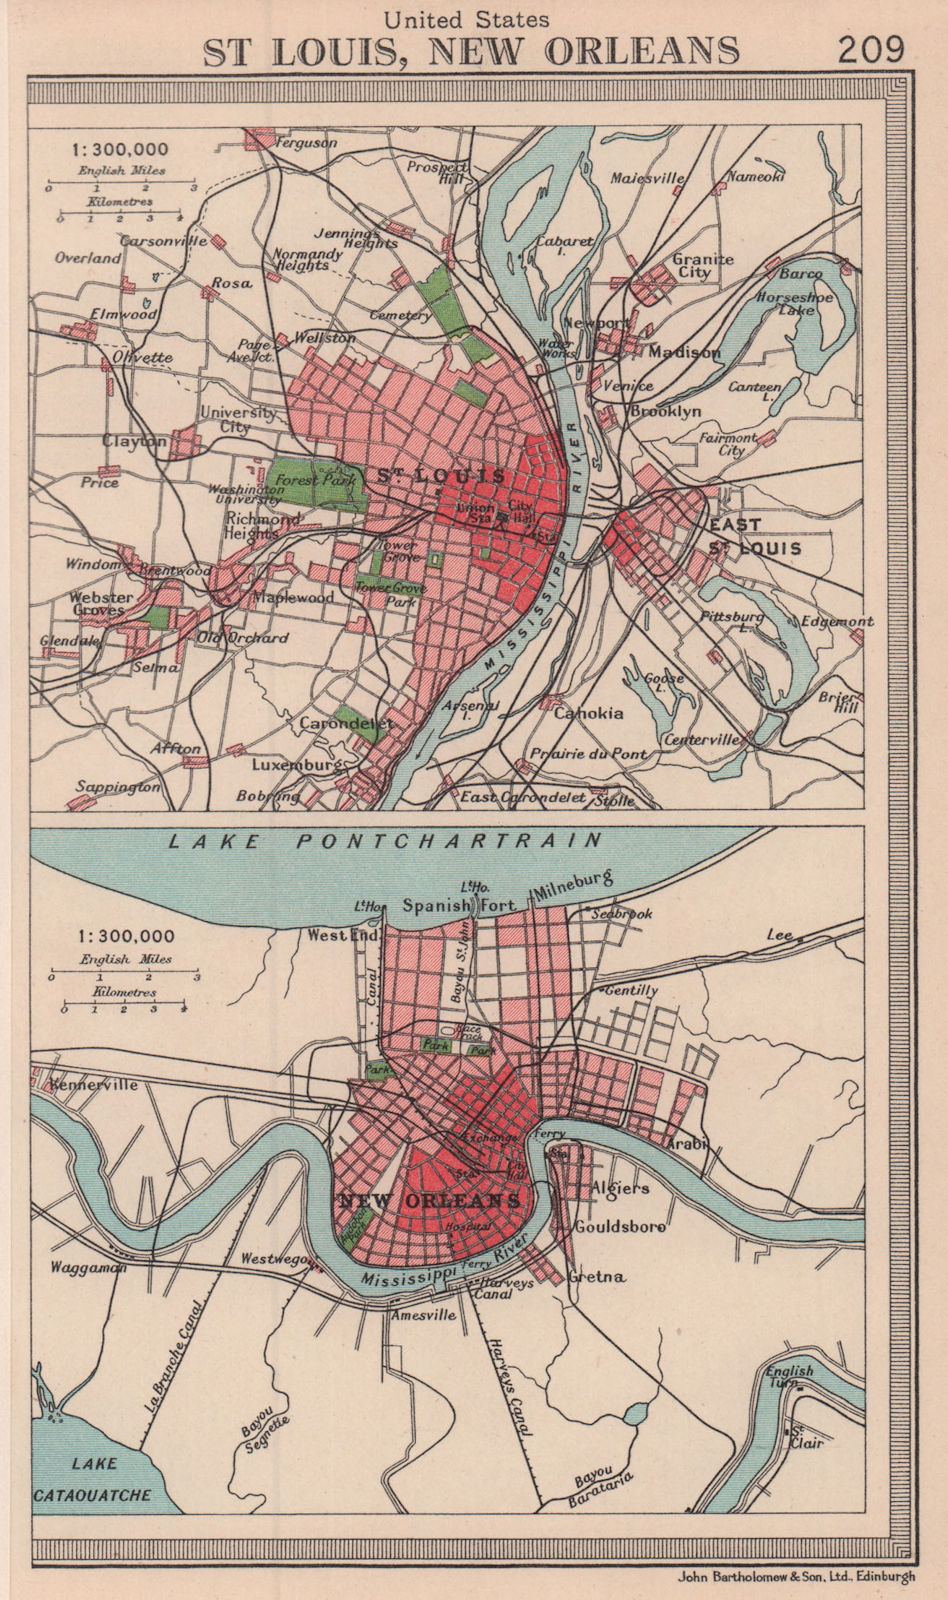 Mississippi cities. St. Louis & New Orleans. BARTHOLOMEW 1949 old vintage map